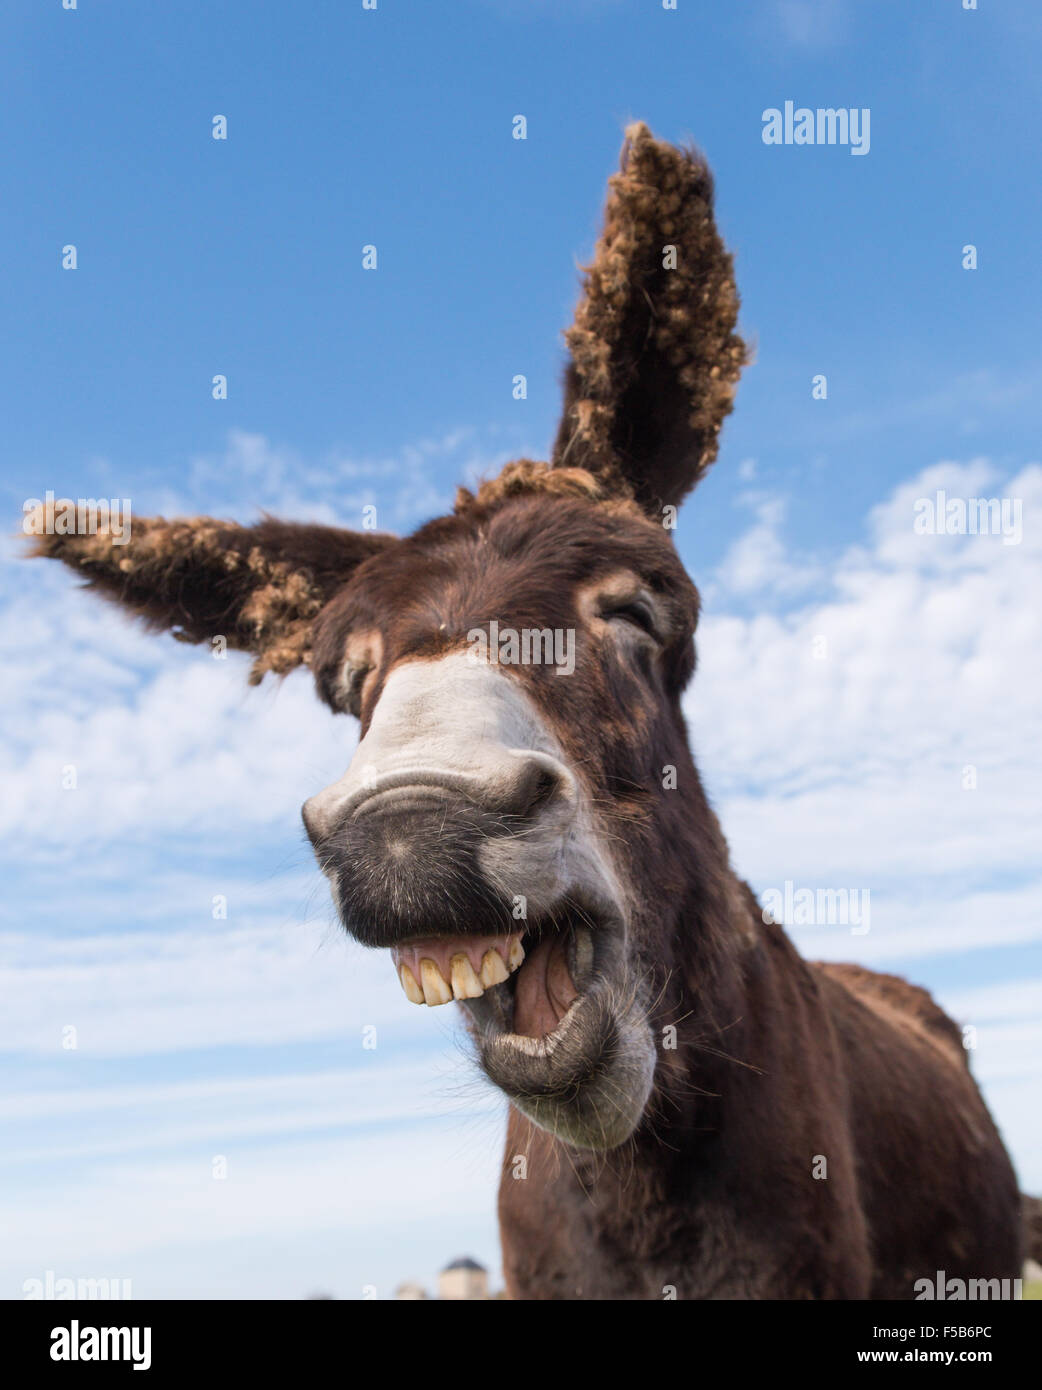 Donkey Laughing with blue sky in background Stock Photo